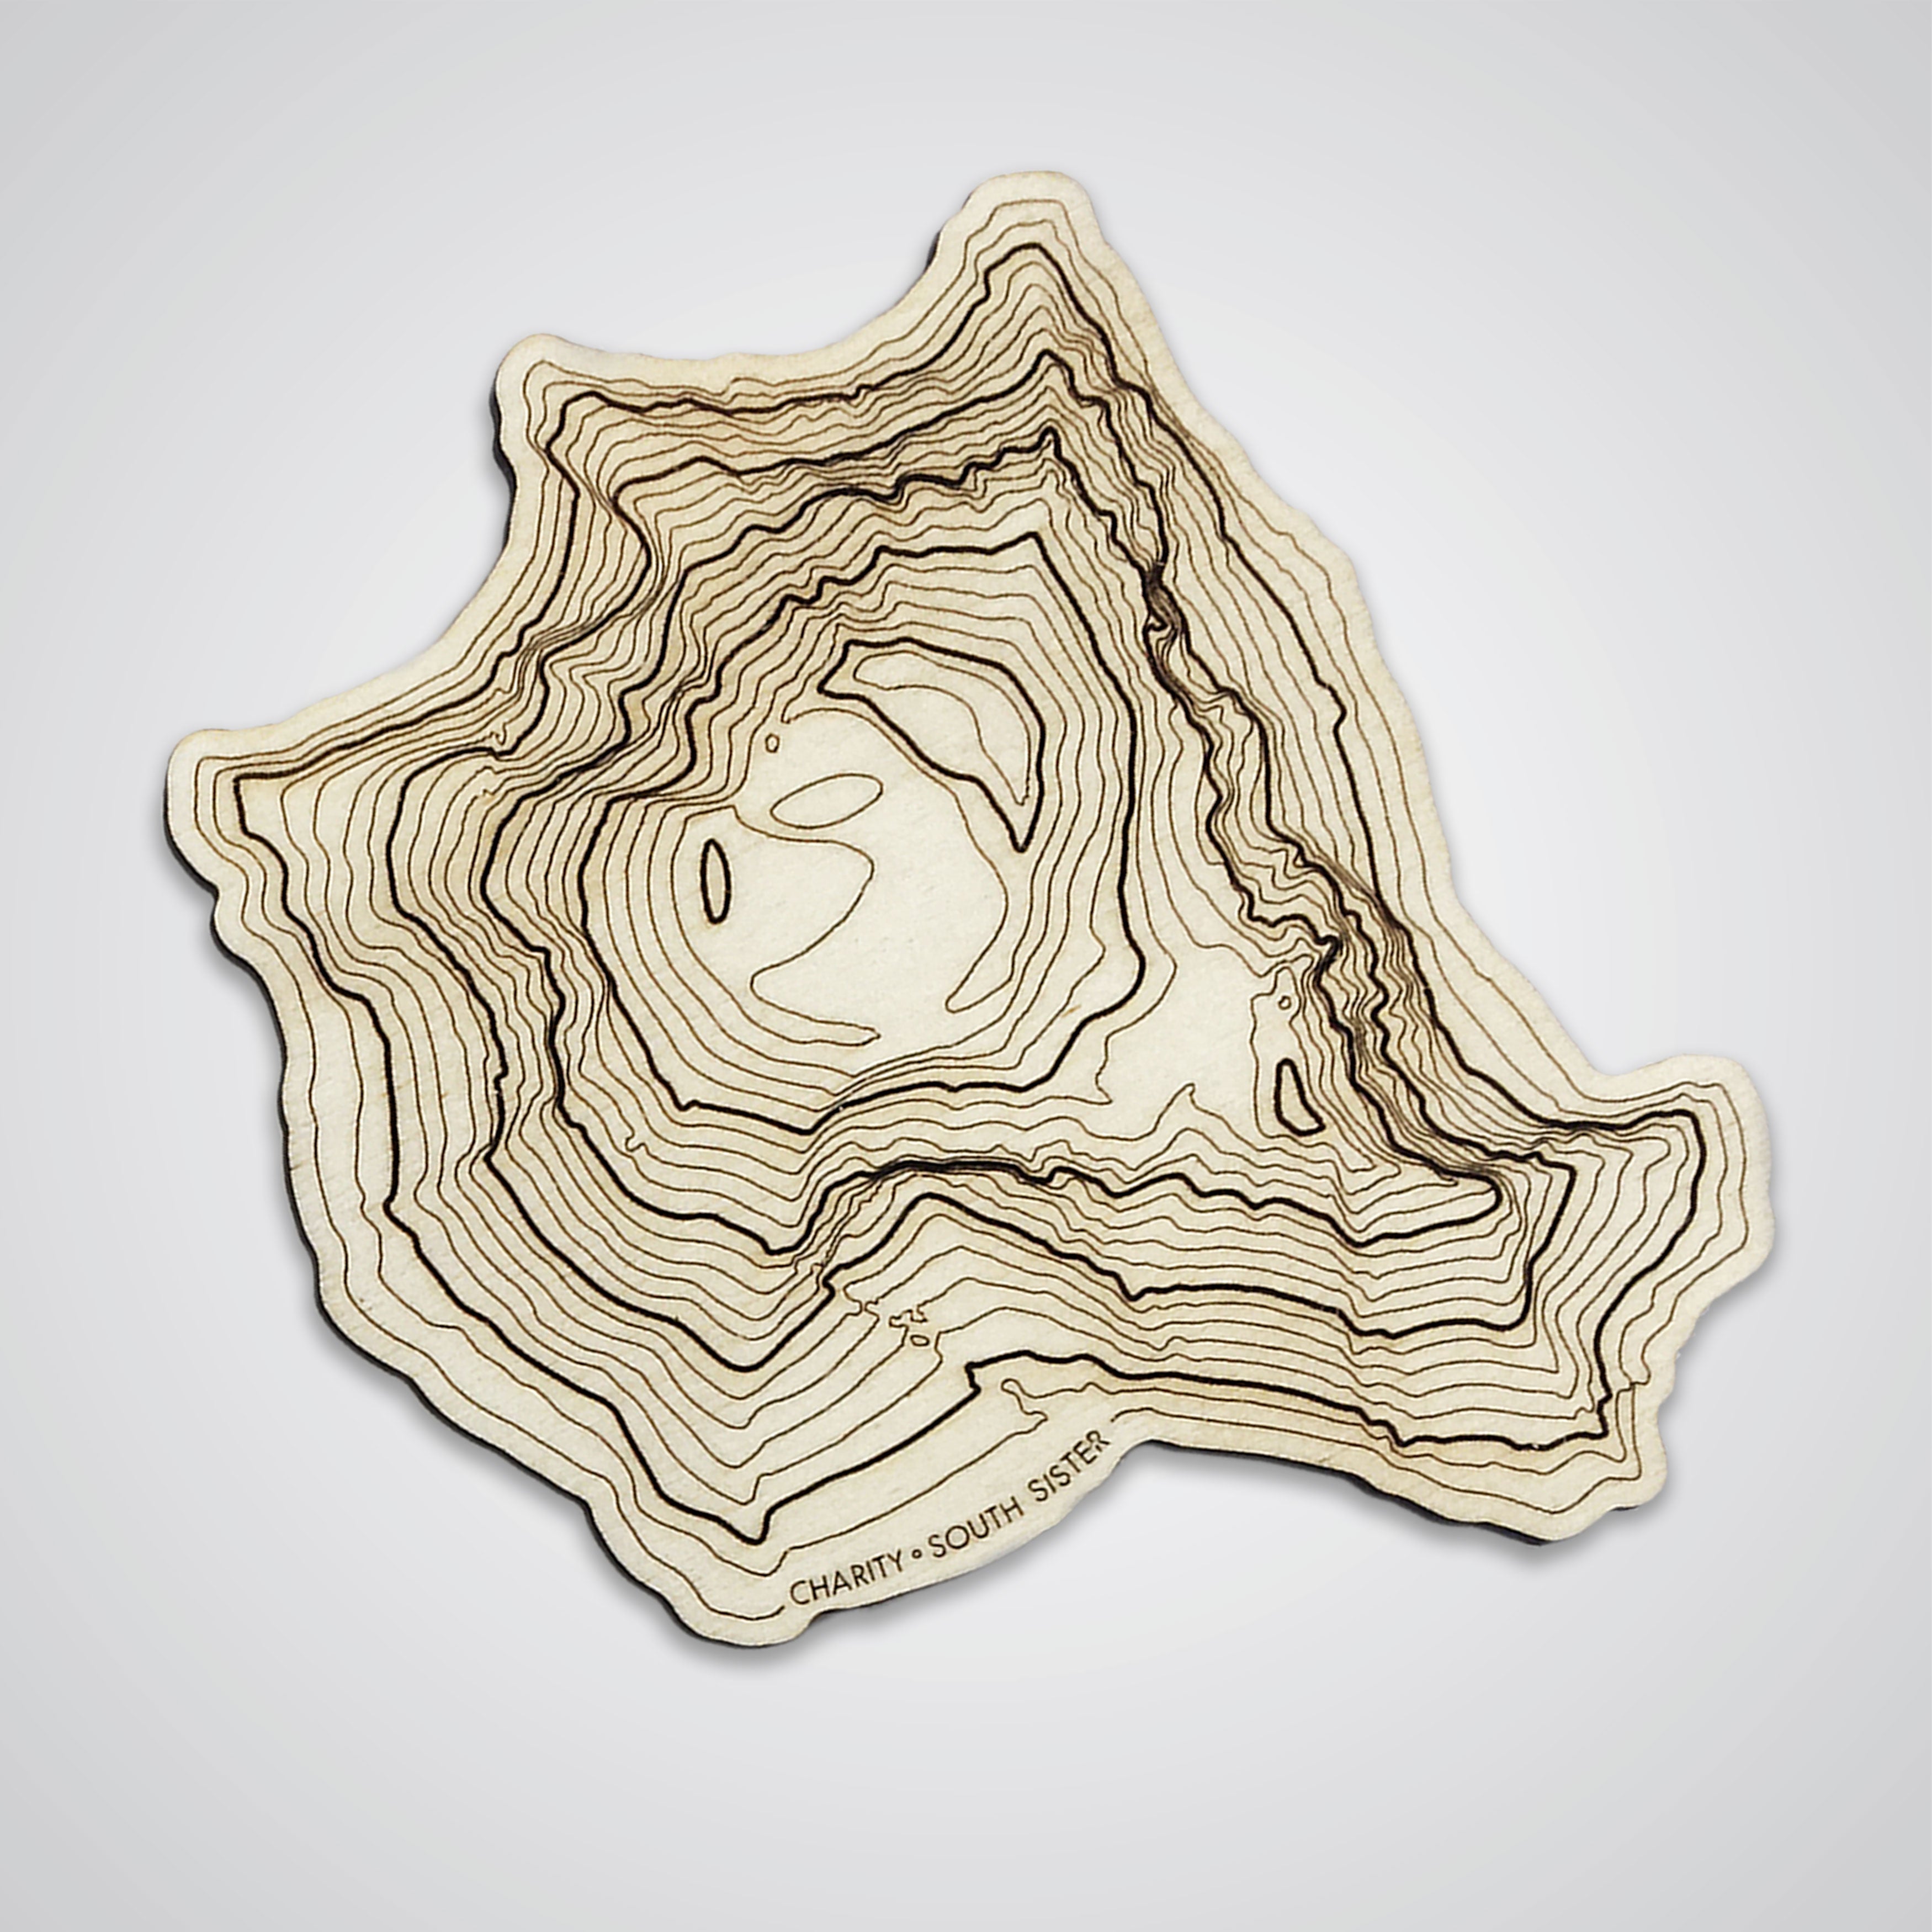 South Sister Topography Coaster - Single